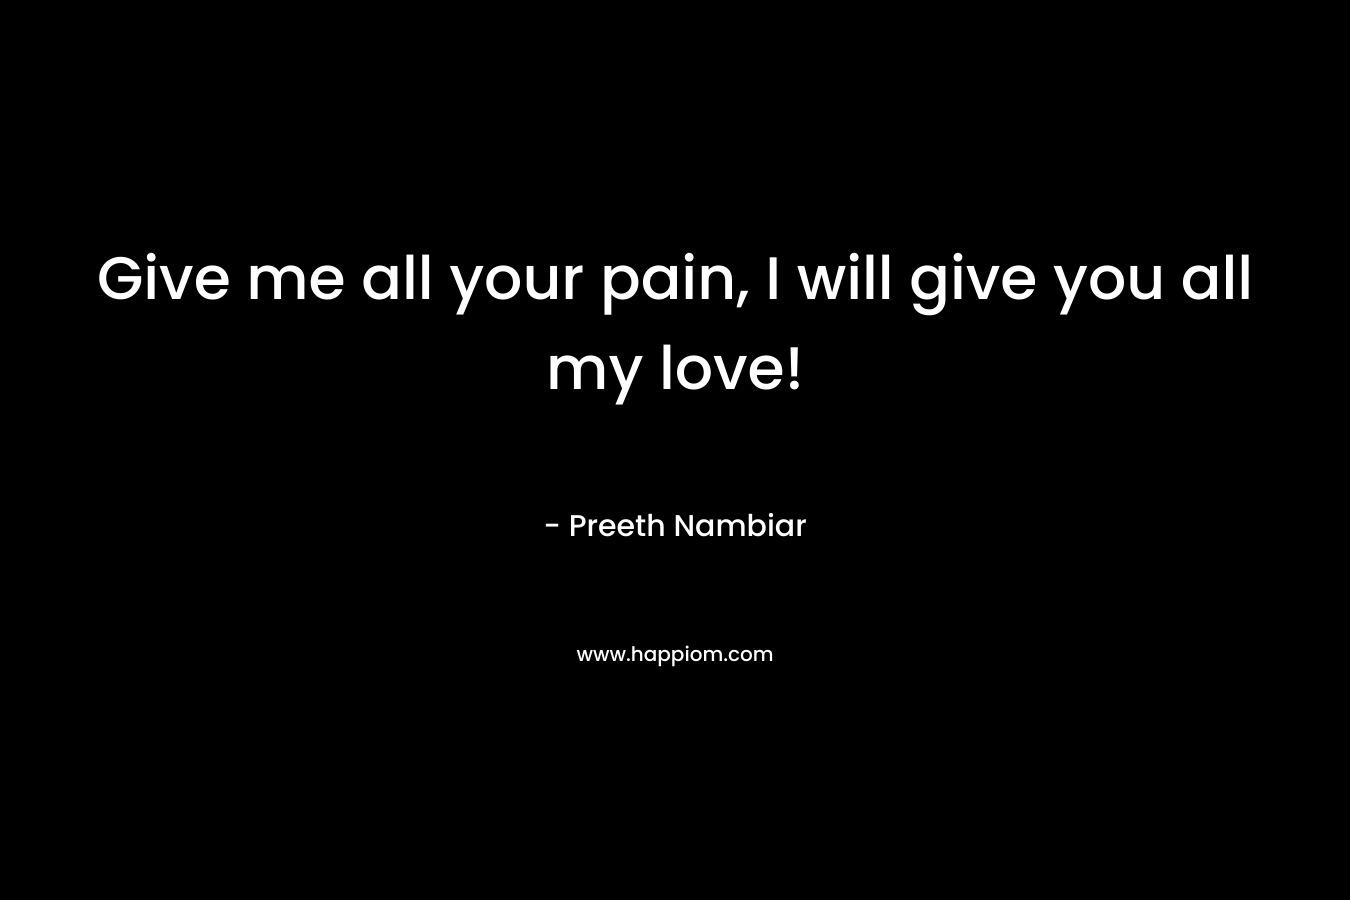 Give me all your pain, I will give you all my love! – Preeth Nambiar